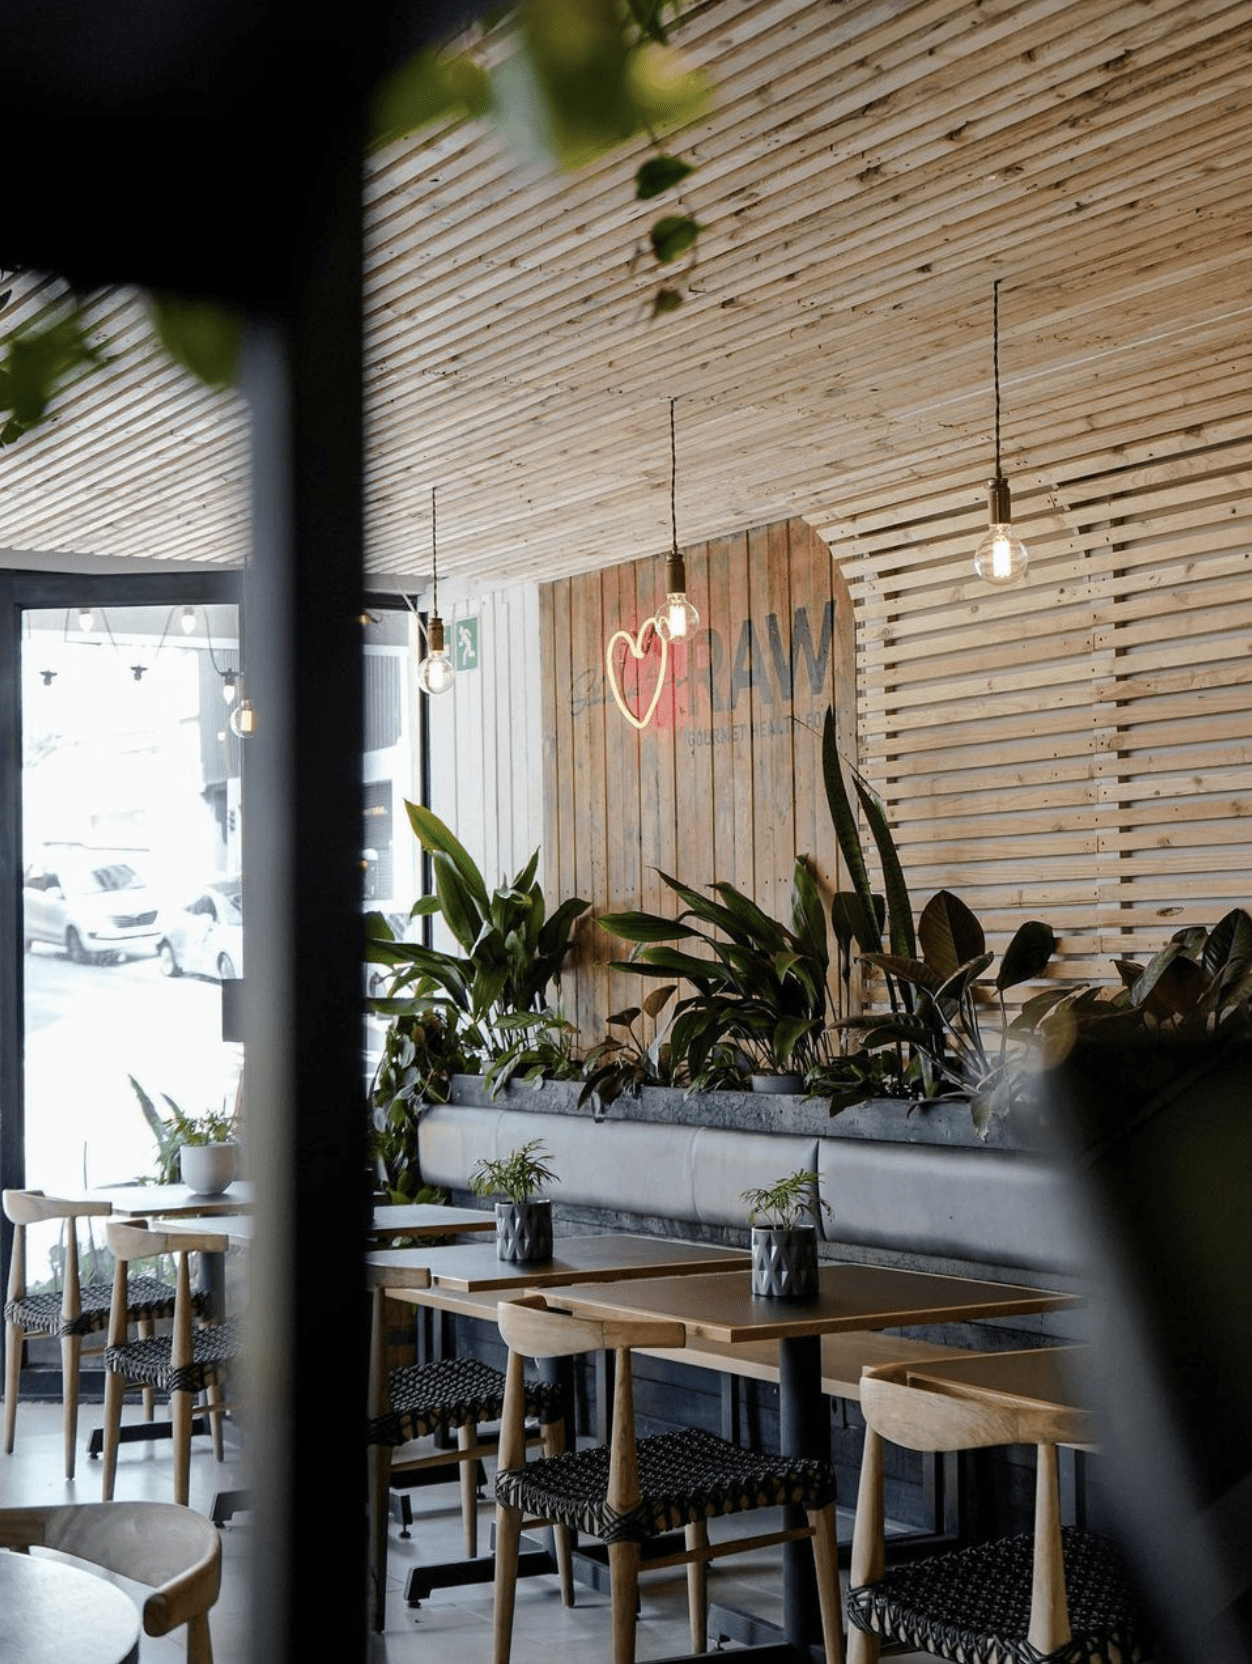 Interiors at checkter’s Raw, Sea Point